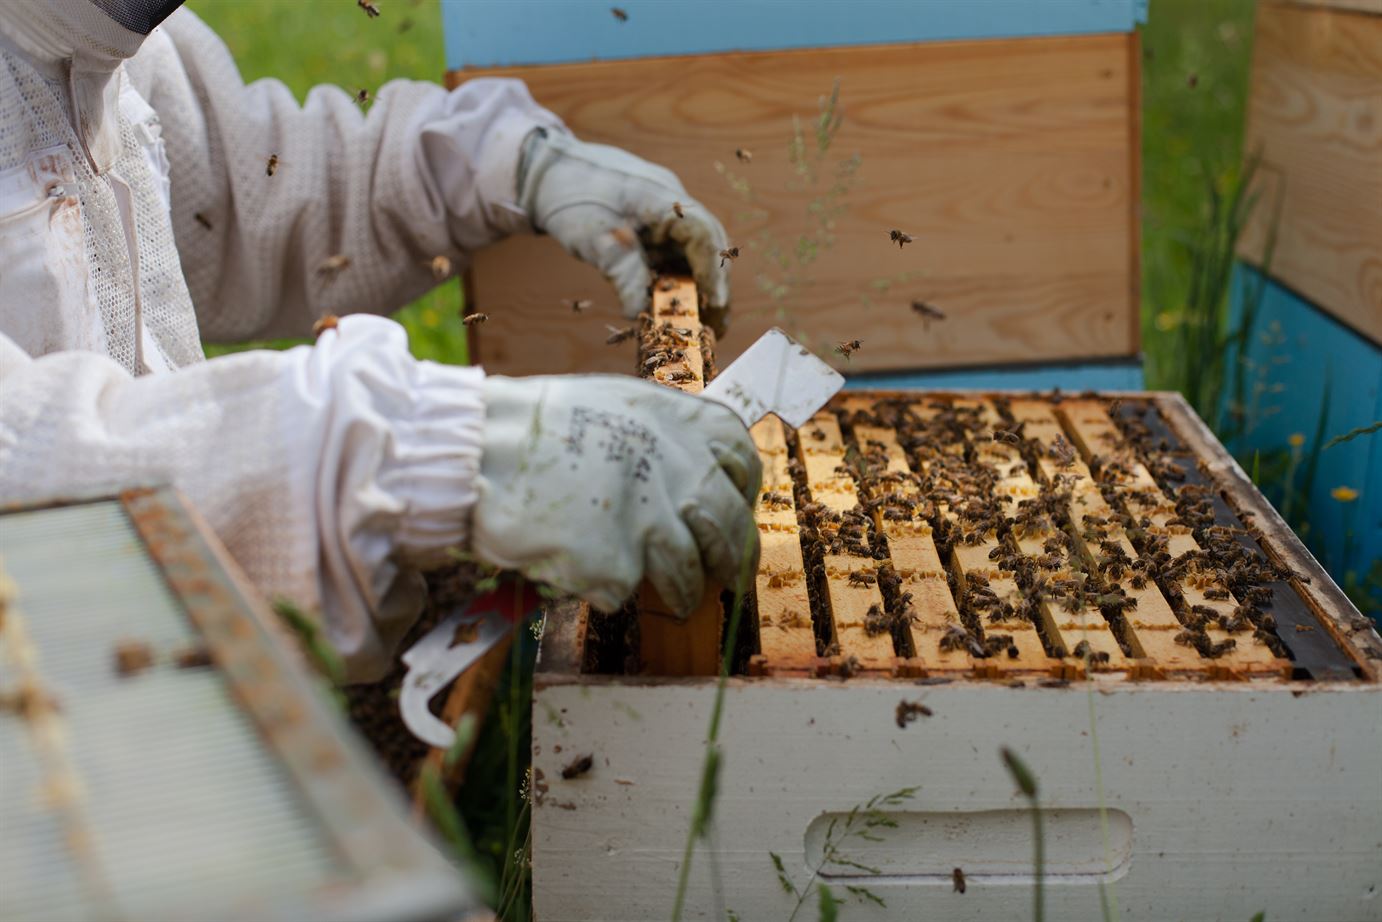 A beekeeper tending to a hive